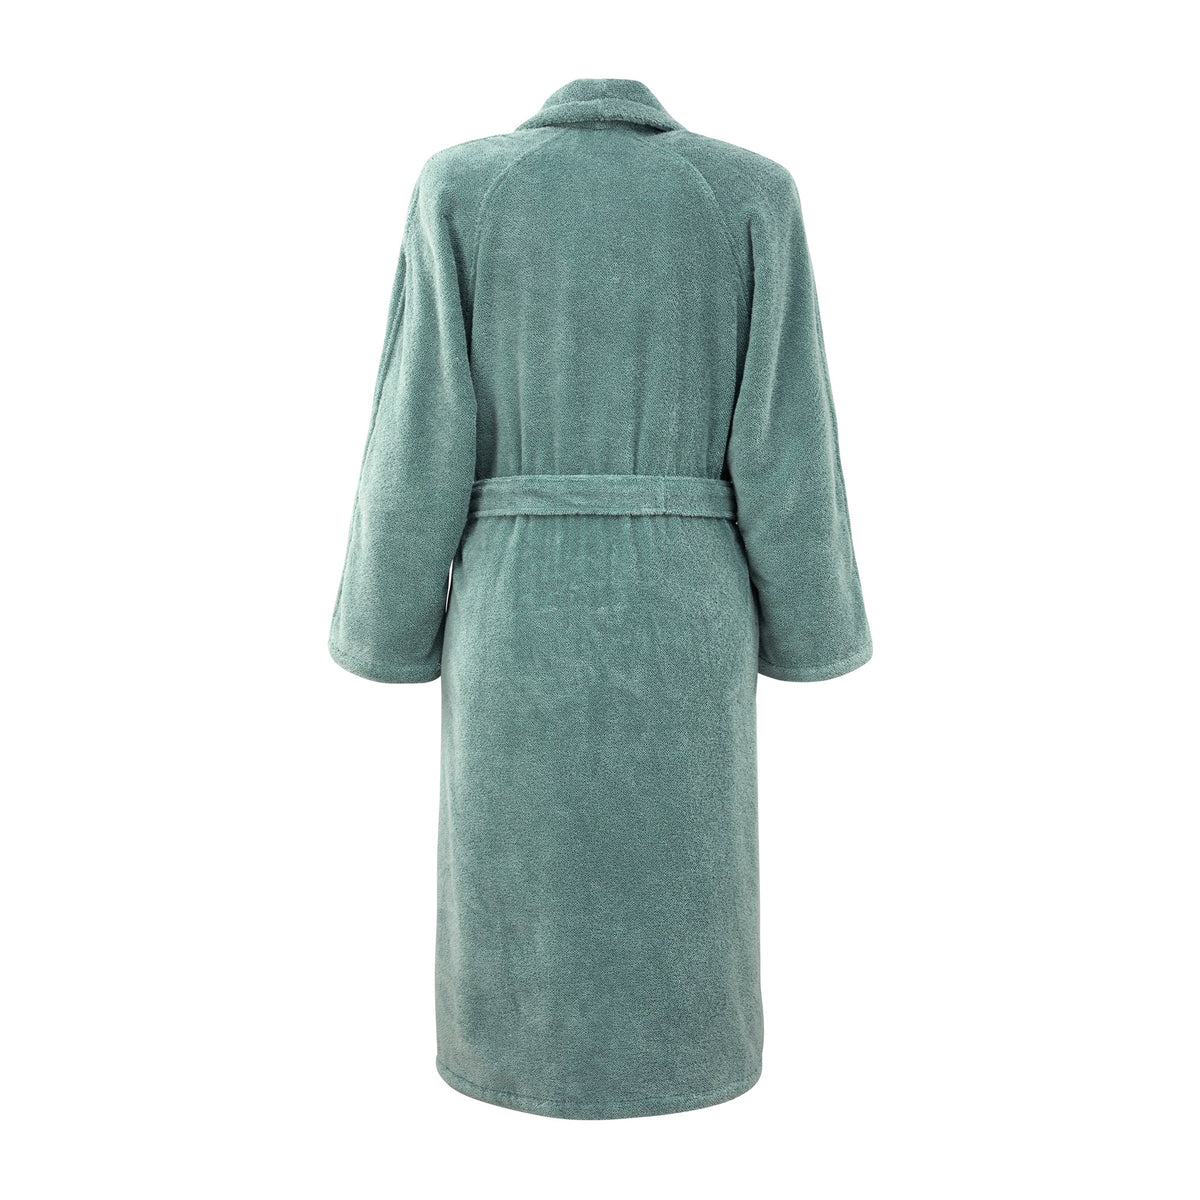 Back View of Yves Delorme Etoile Bath Robe in Color Fjord